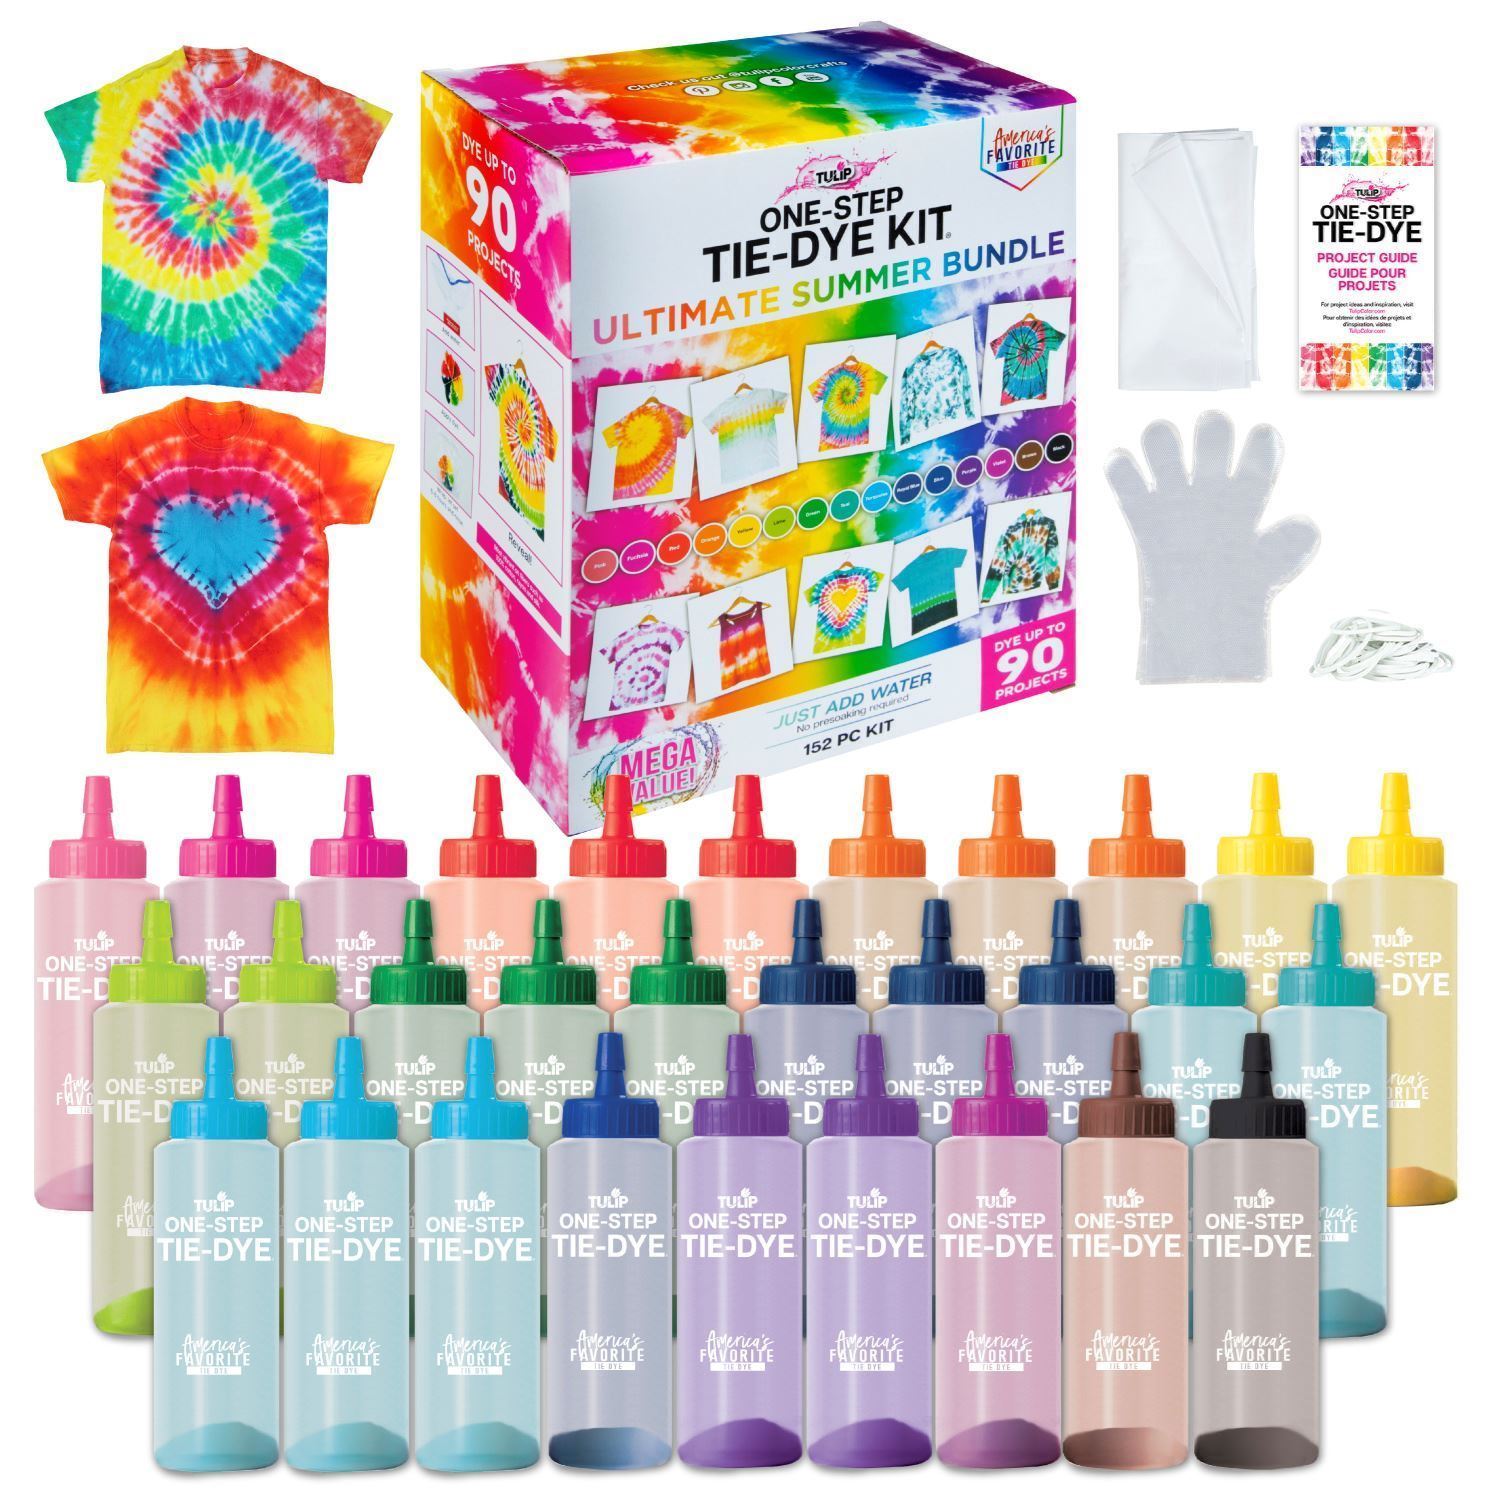 How to host tie-dye party supplies needed